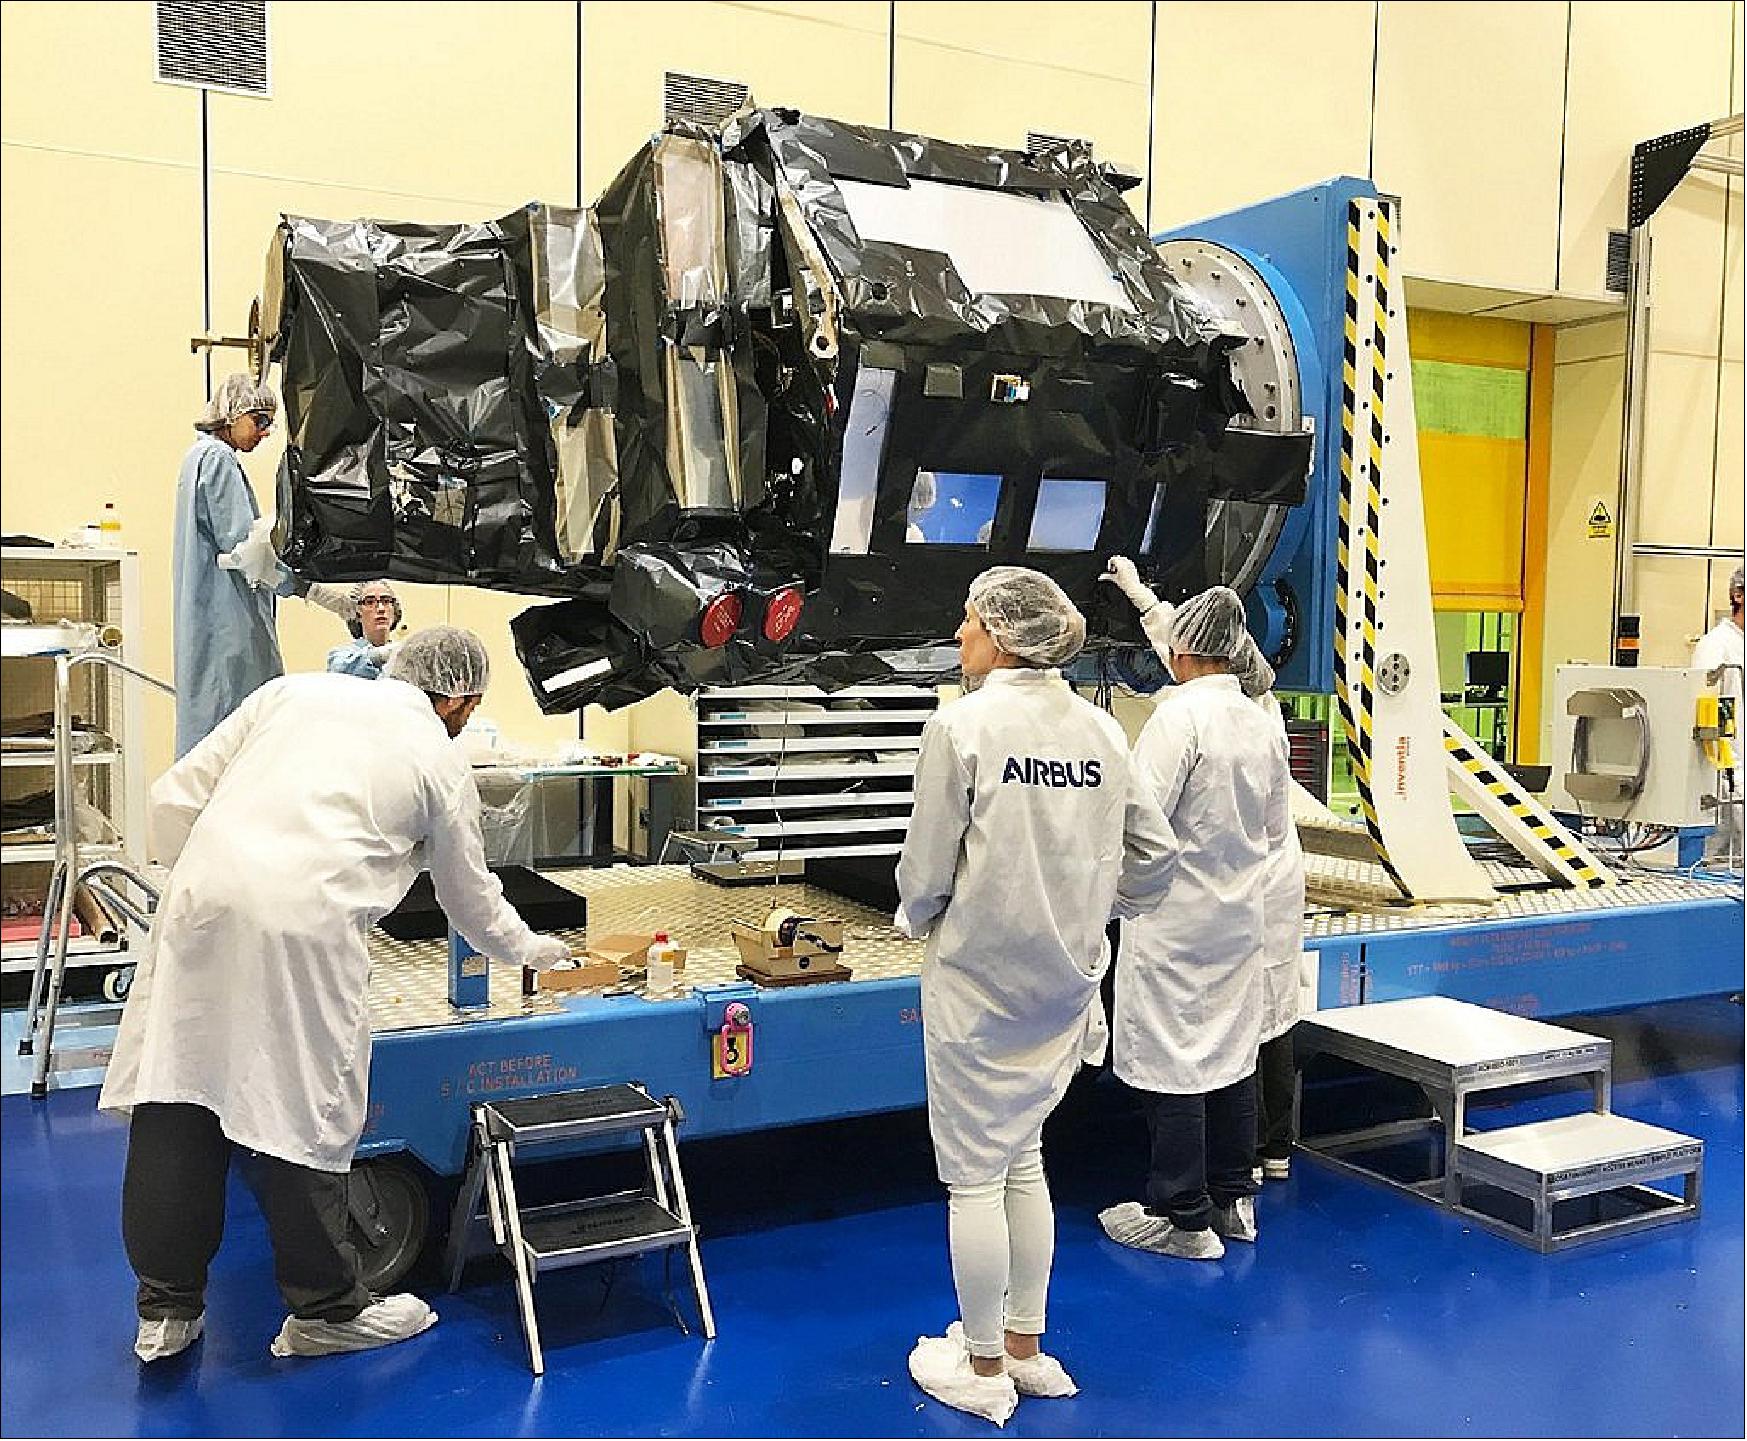 Figure 15: Airbus built SEOSAT/Ingenio is finished and ready for testing (image credit: Airbus Space)